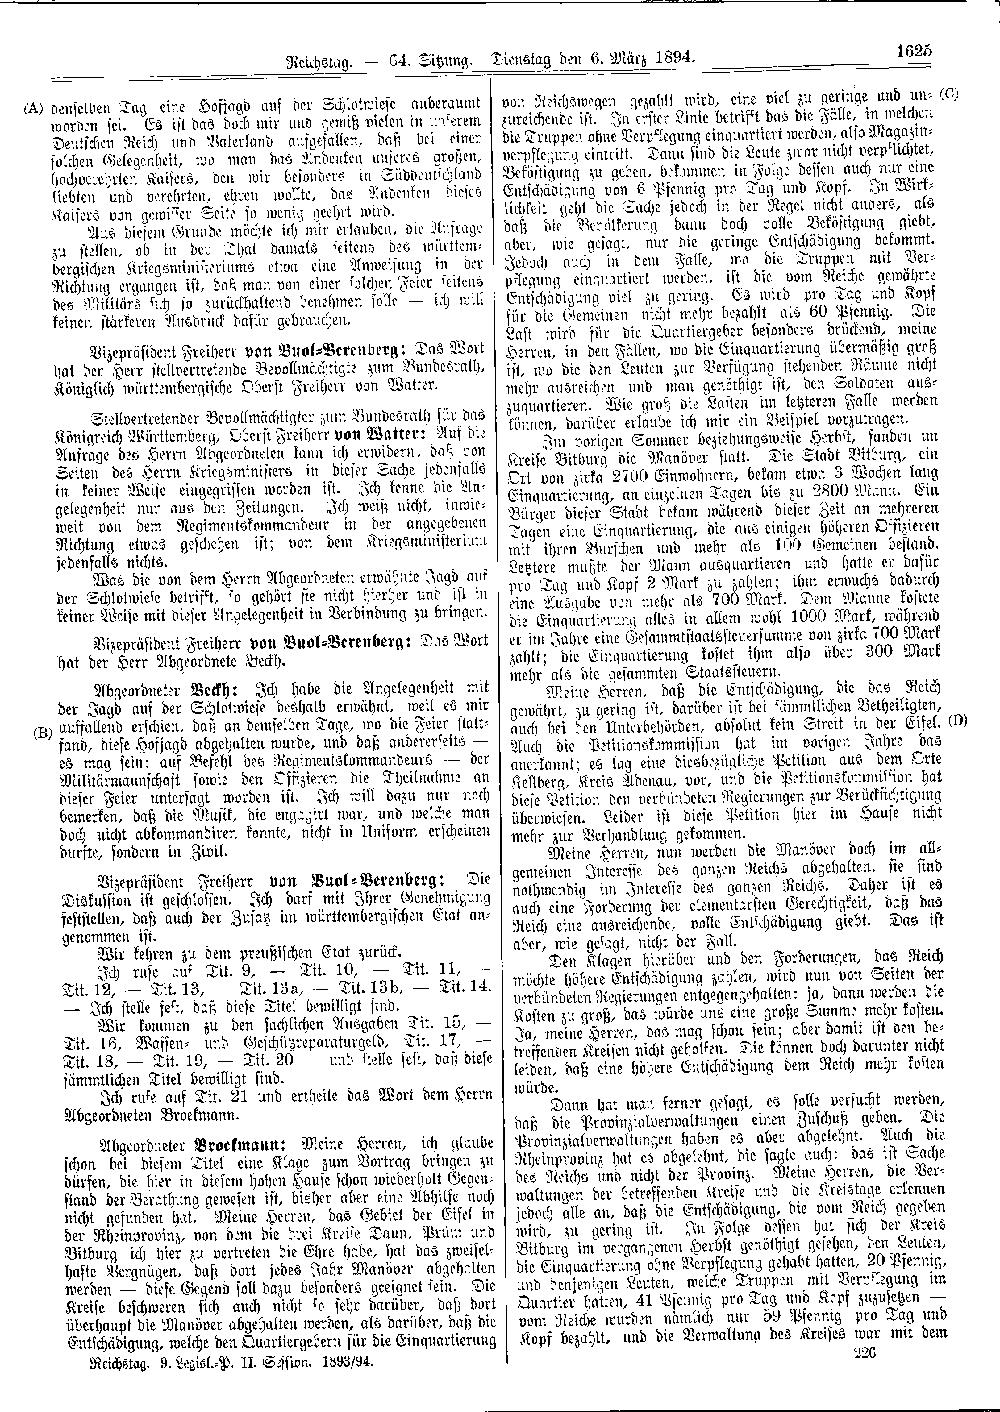 Scan of page 1625